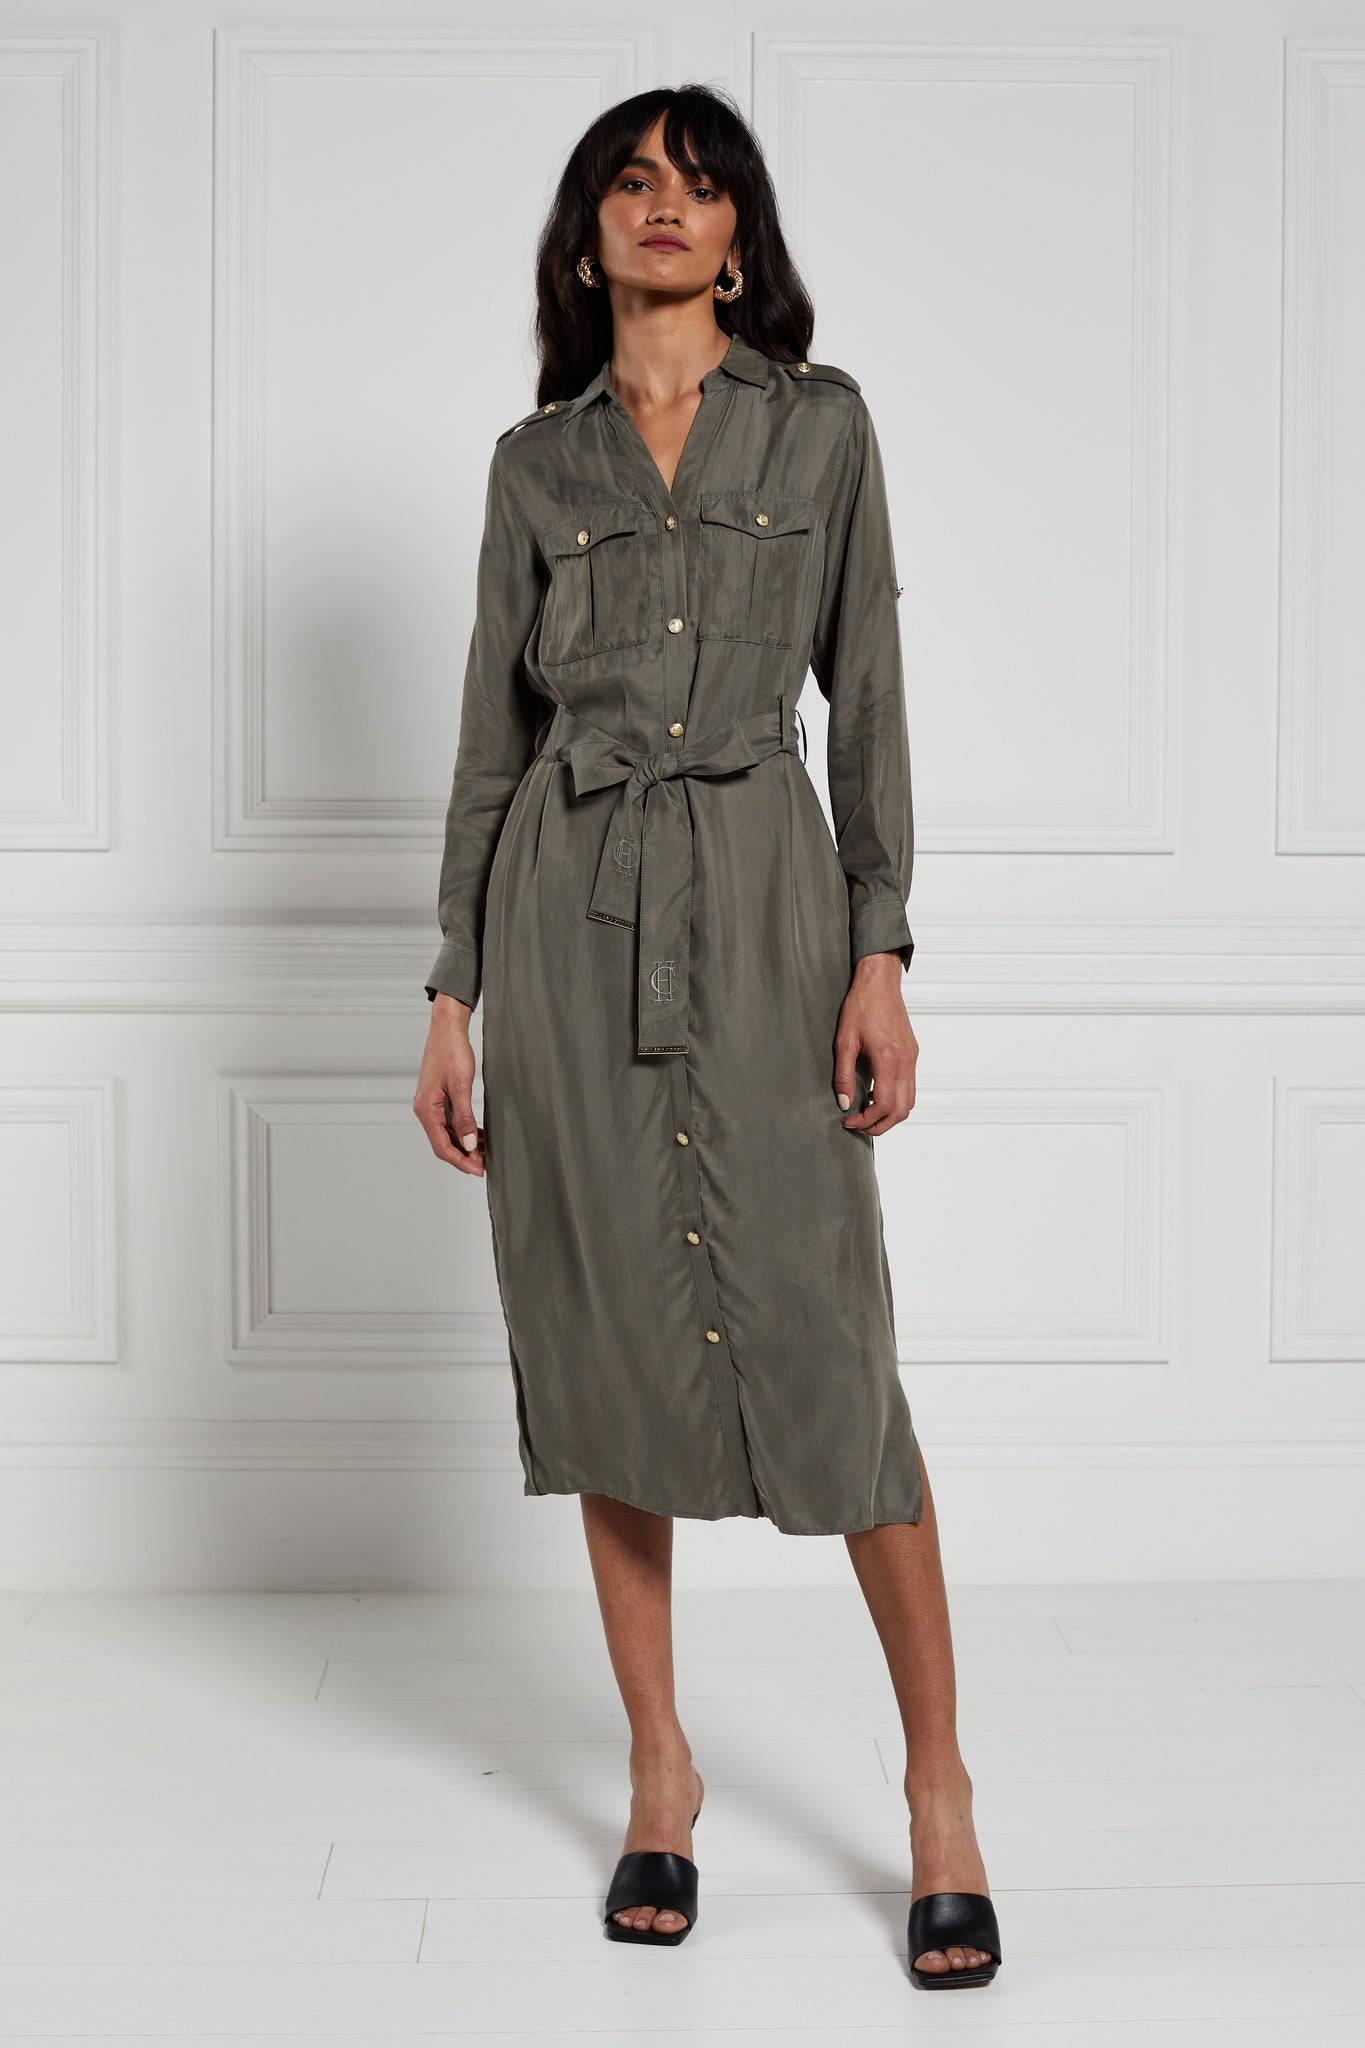 womens green military midi shirt dress with tie around waist and gold buttons down the front